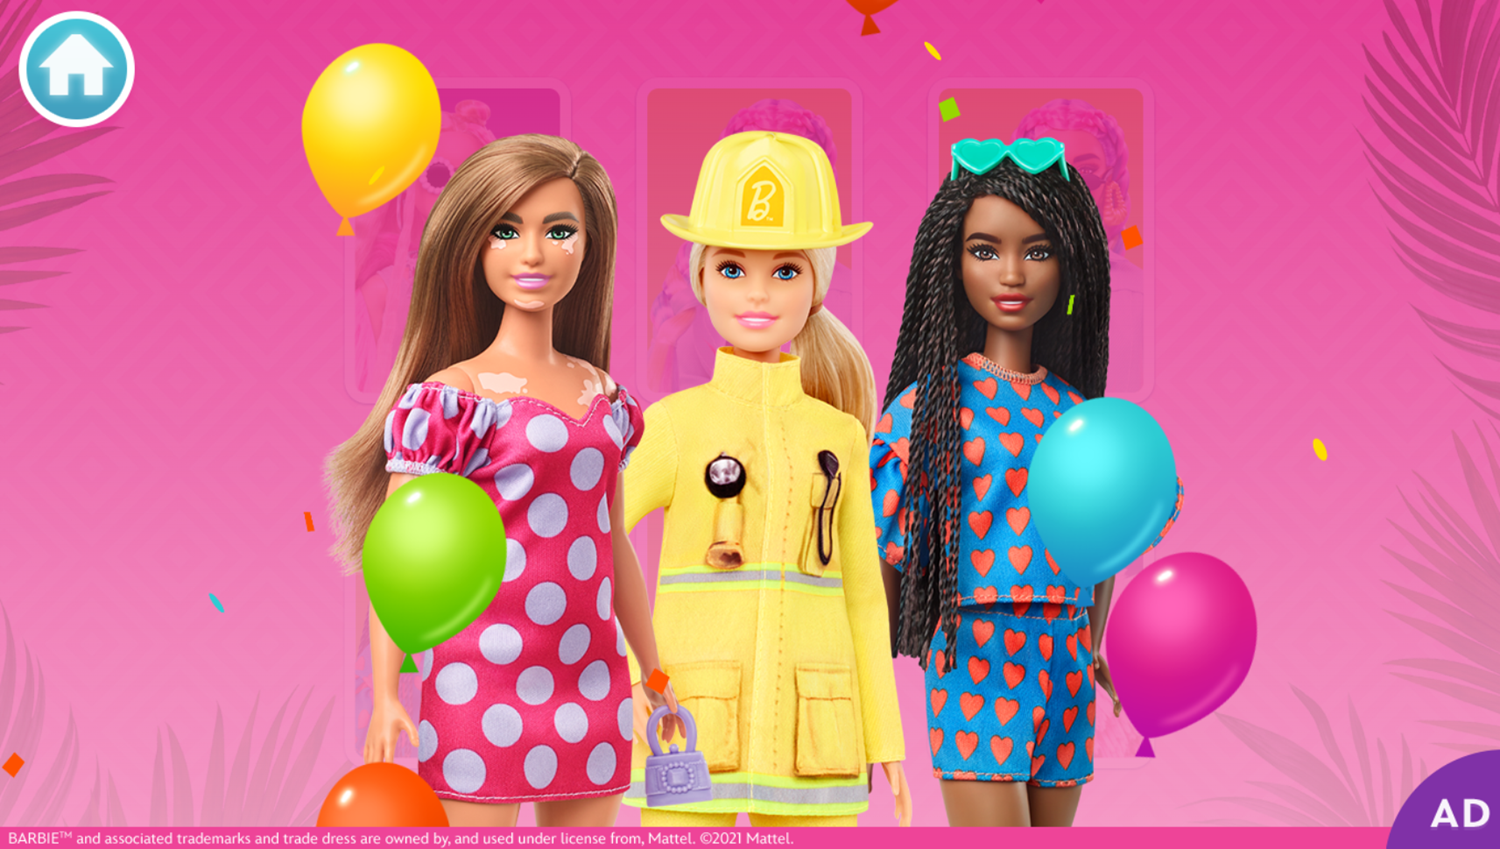 Barbie You Can Be Anything Matching Game Complete Screenshot.